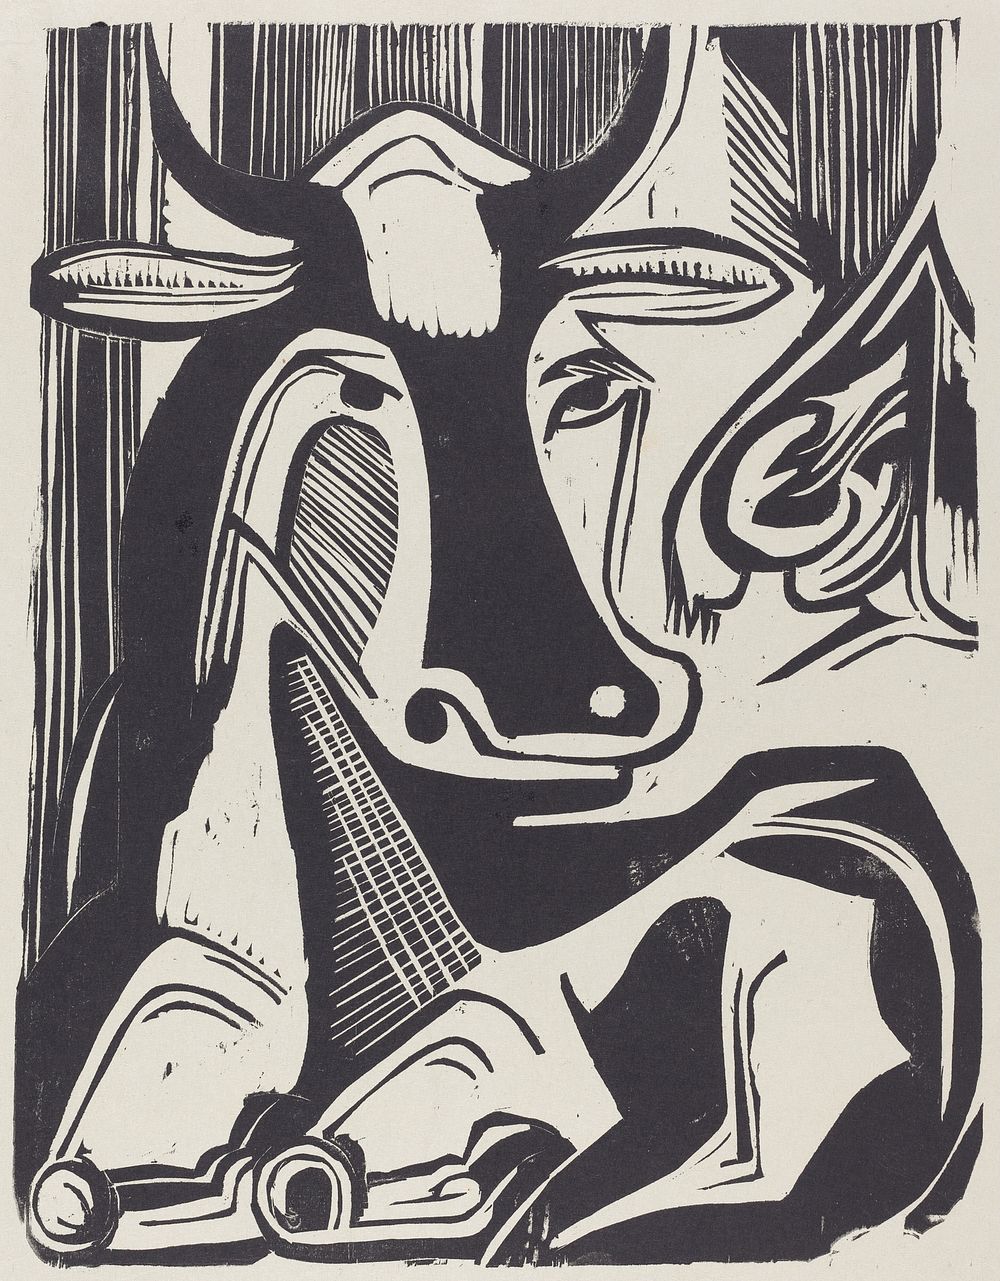 The Large Cow Lying Down (1929) print in high resolution by Ernst Ludwig Kirchner.  